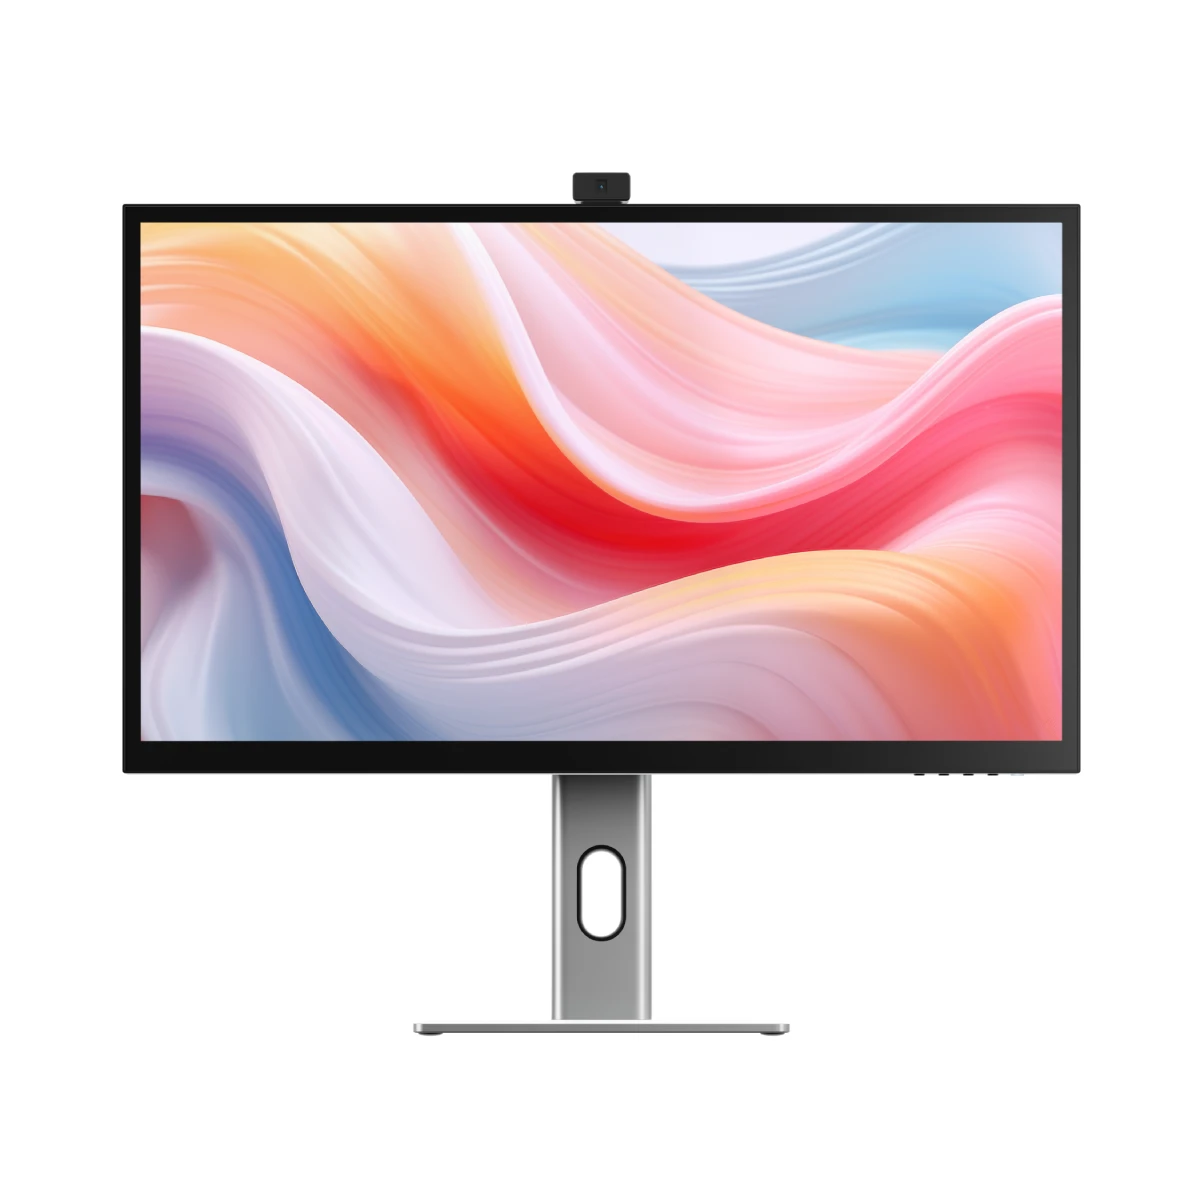 clarity-pro-27-uhd-4k-monitor-with-65w-pd-and-webcam-thunderbolt-4-blaze-docking-station_2